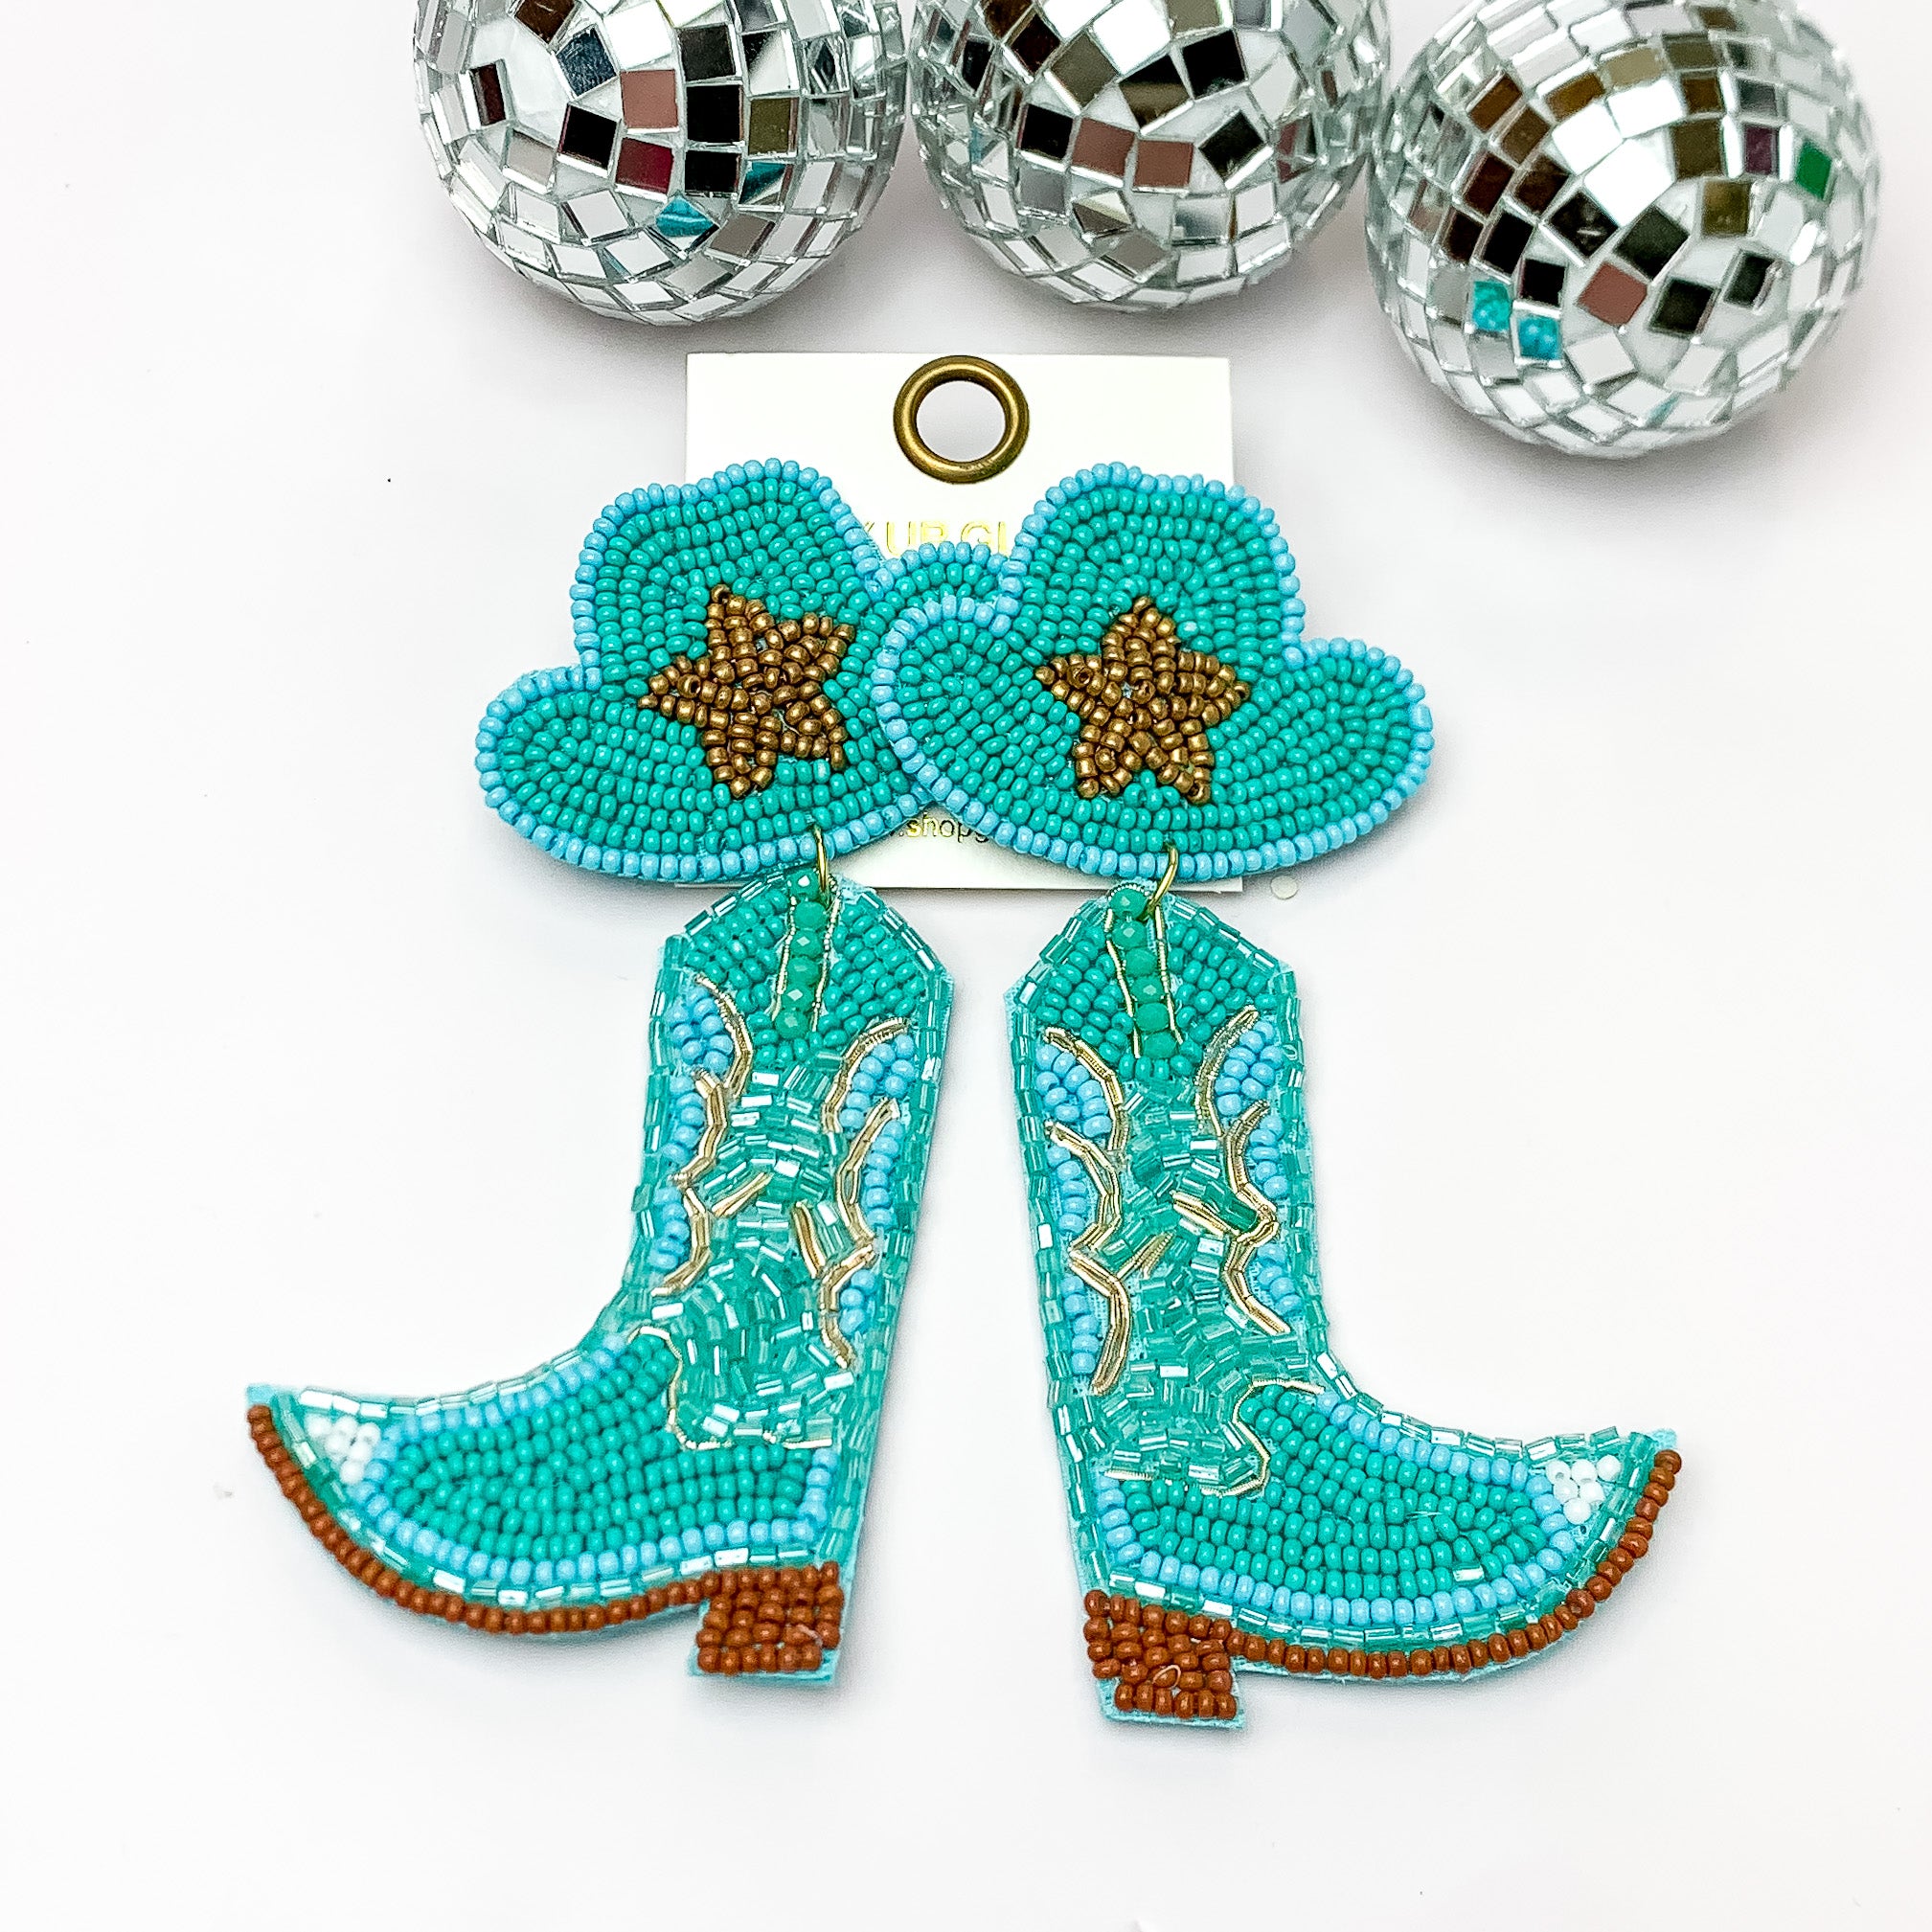 Beaded Blue, and Gold Cowboy Boot Earrings with Hat Studs. Pictured on a white background with disco balls at the top.